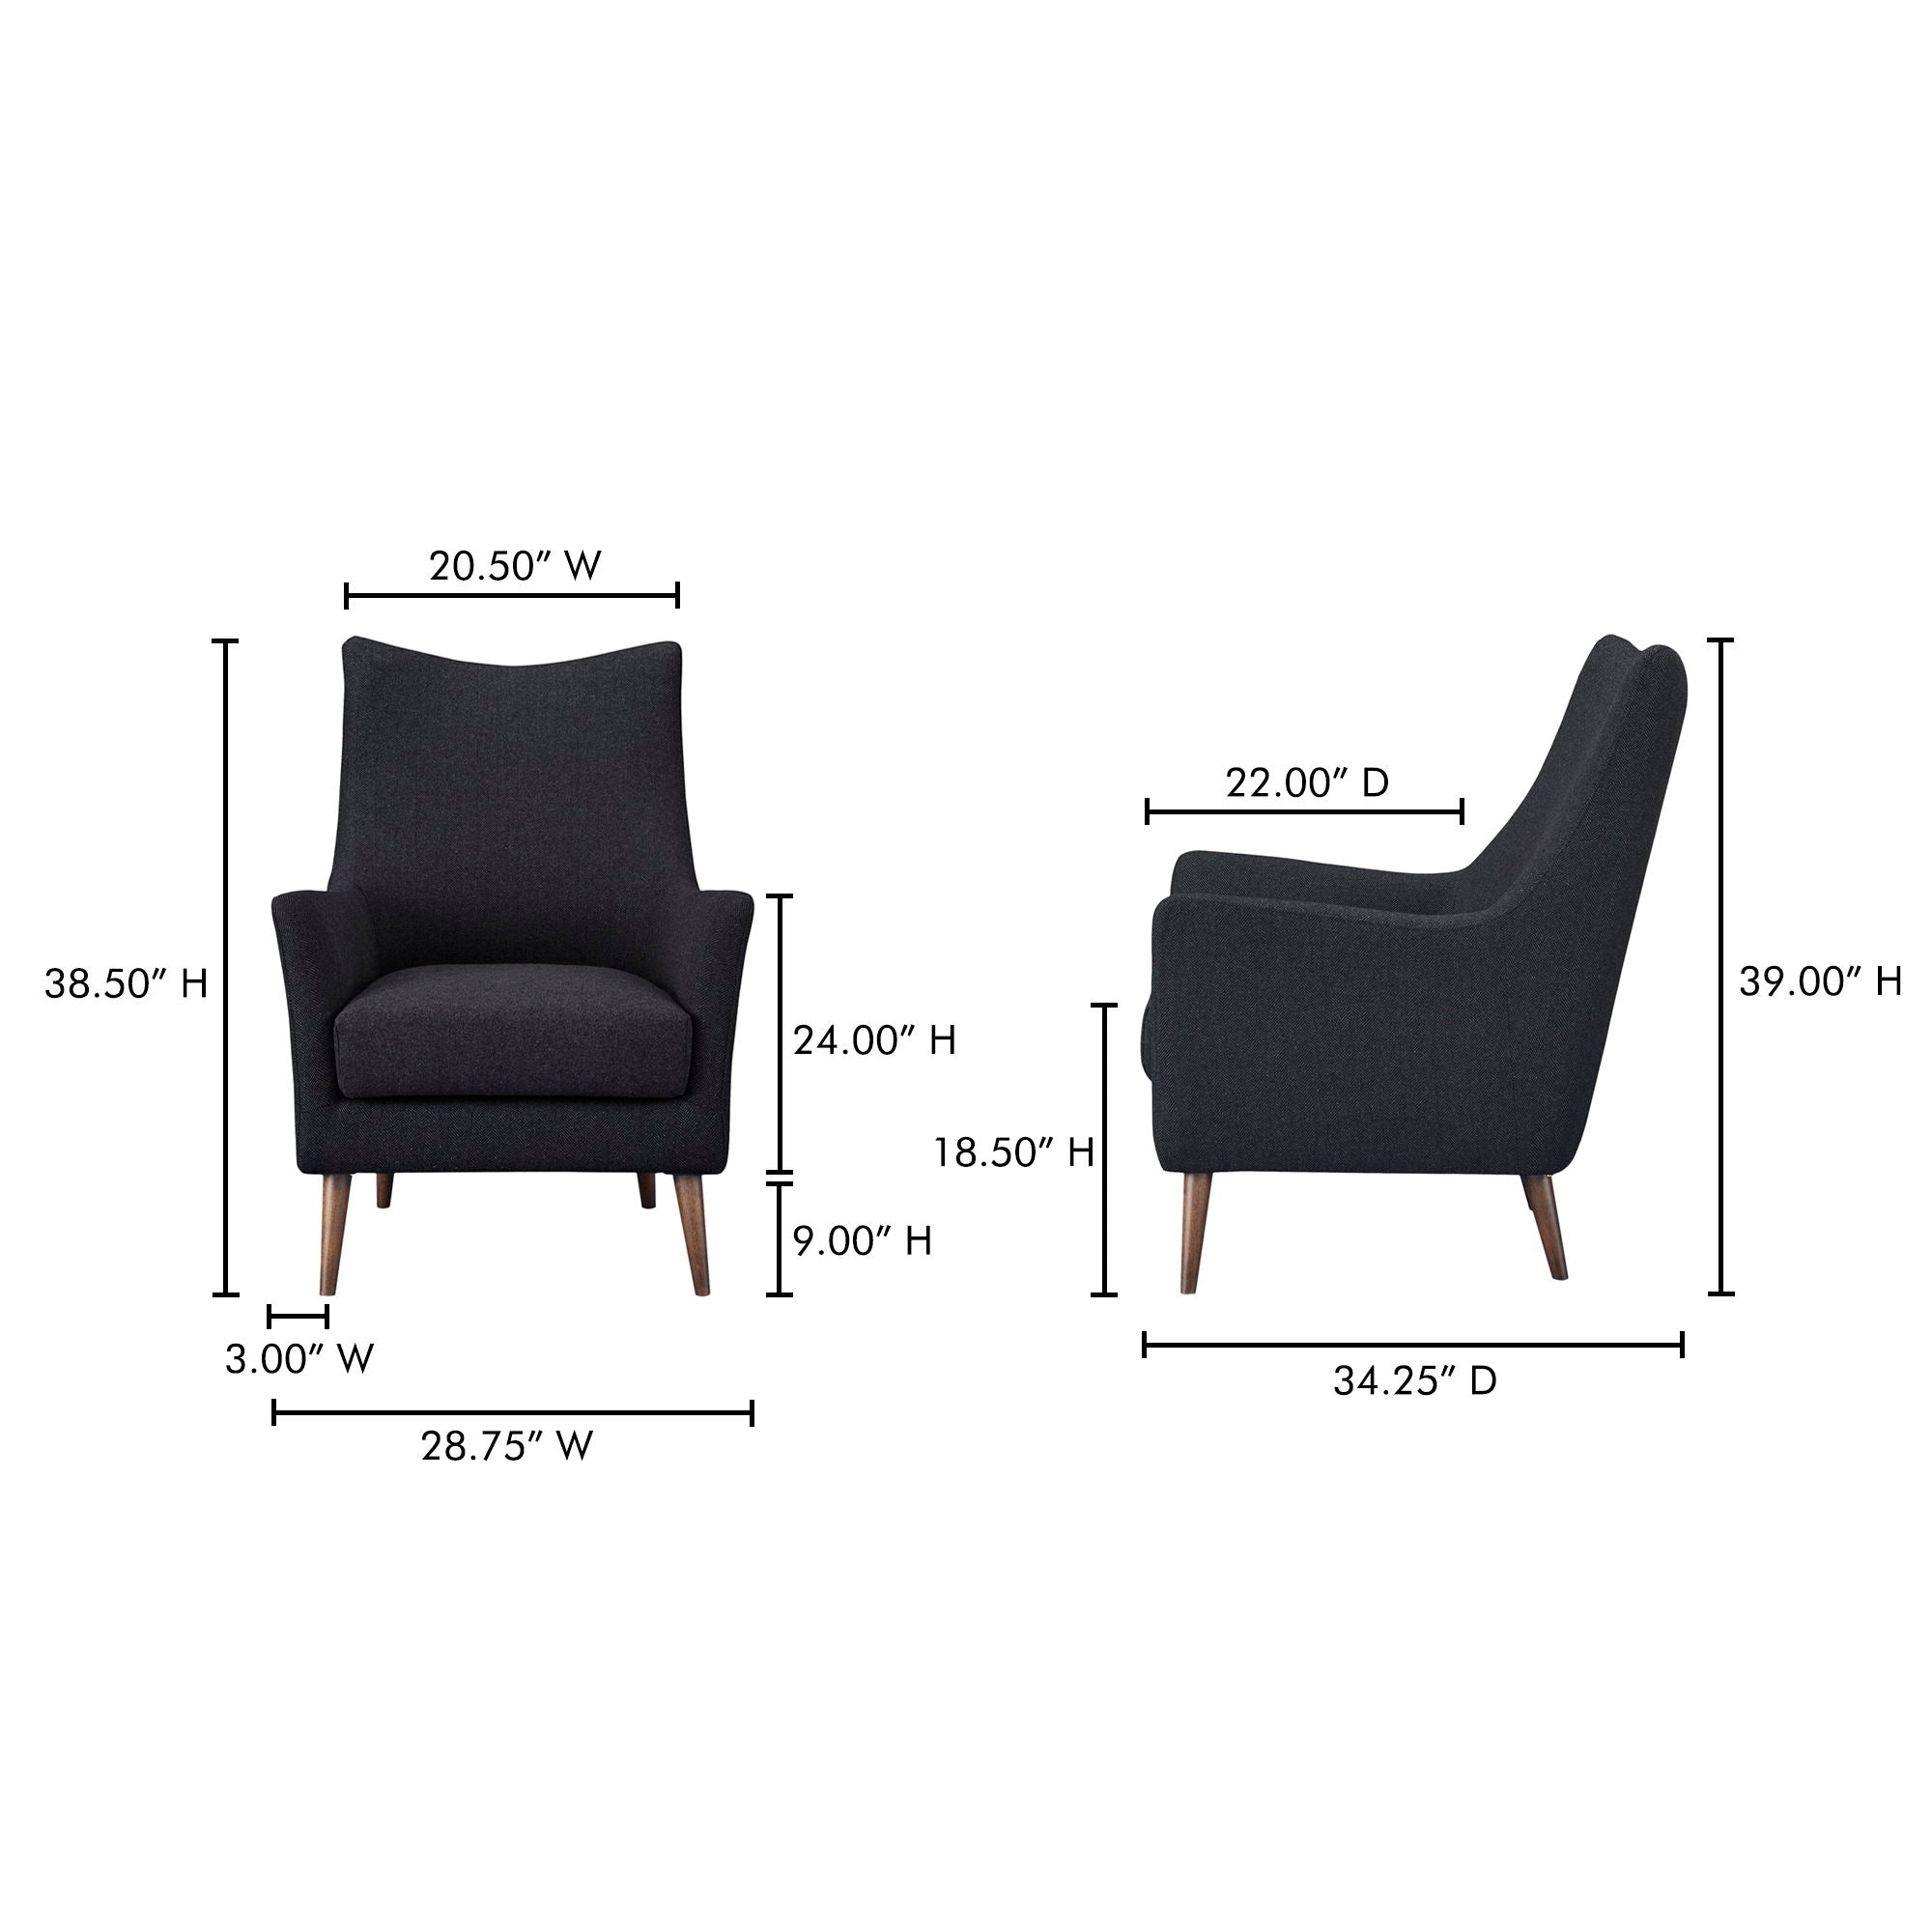 Fisher - Armchair - Charcoal Wool Blend